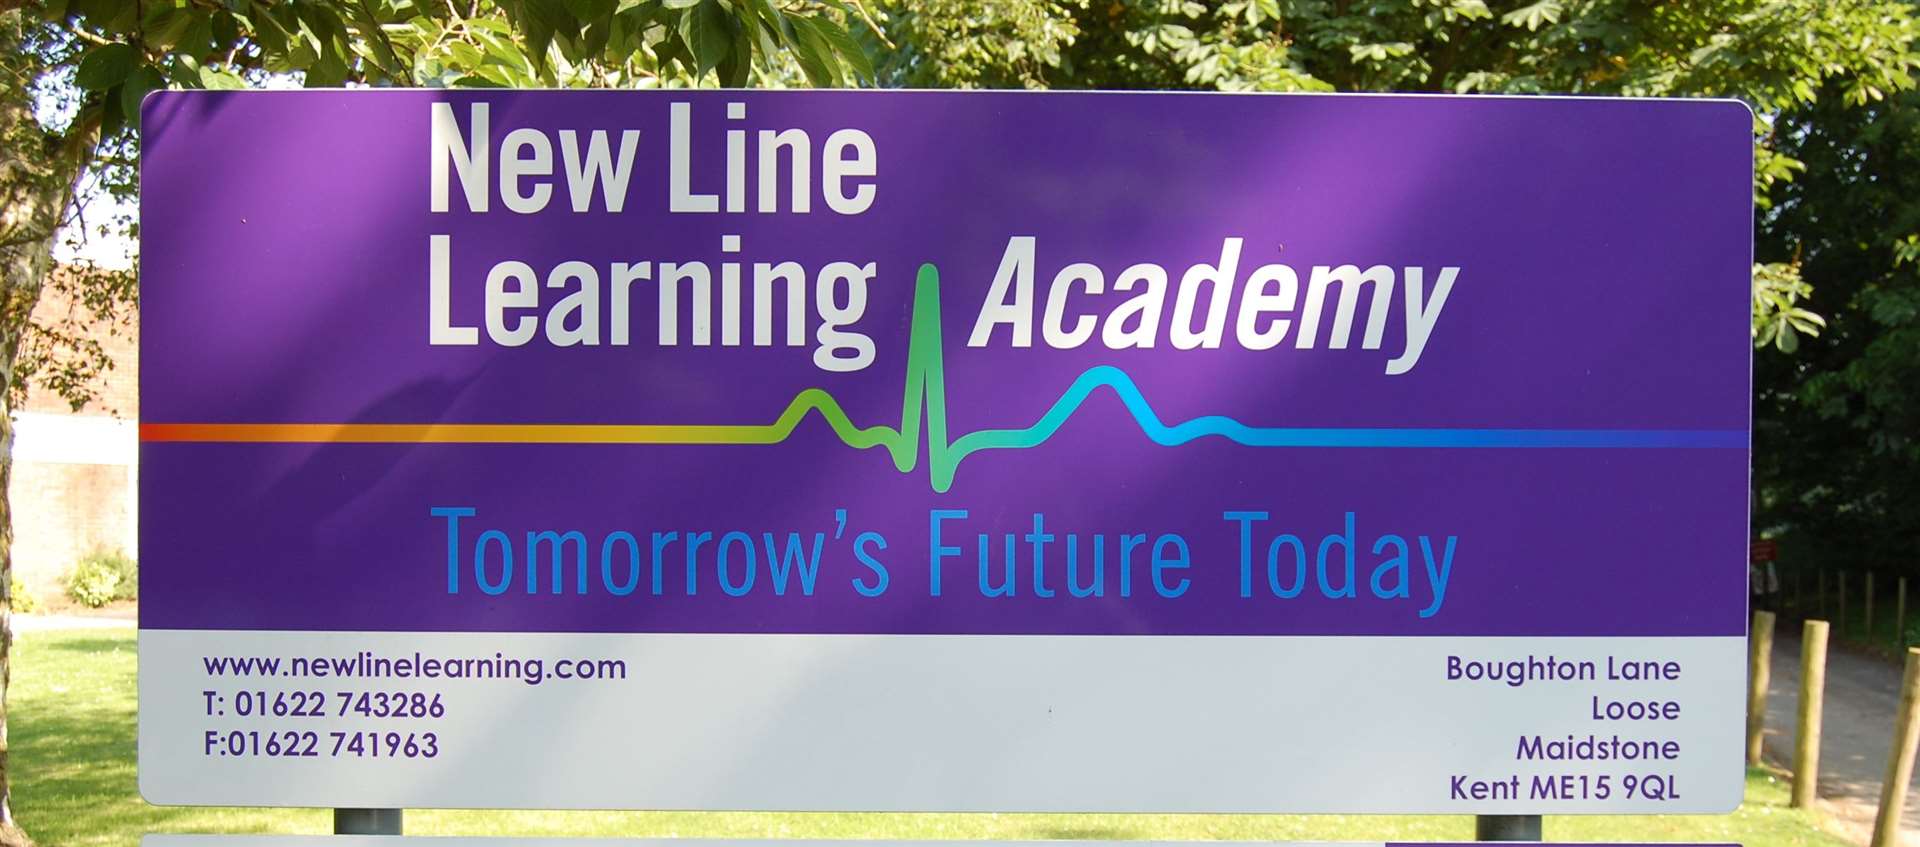 New Line Learning Academy has partially closed due to staff shortages.